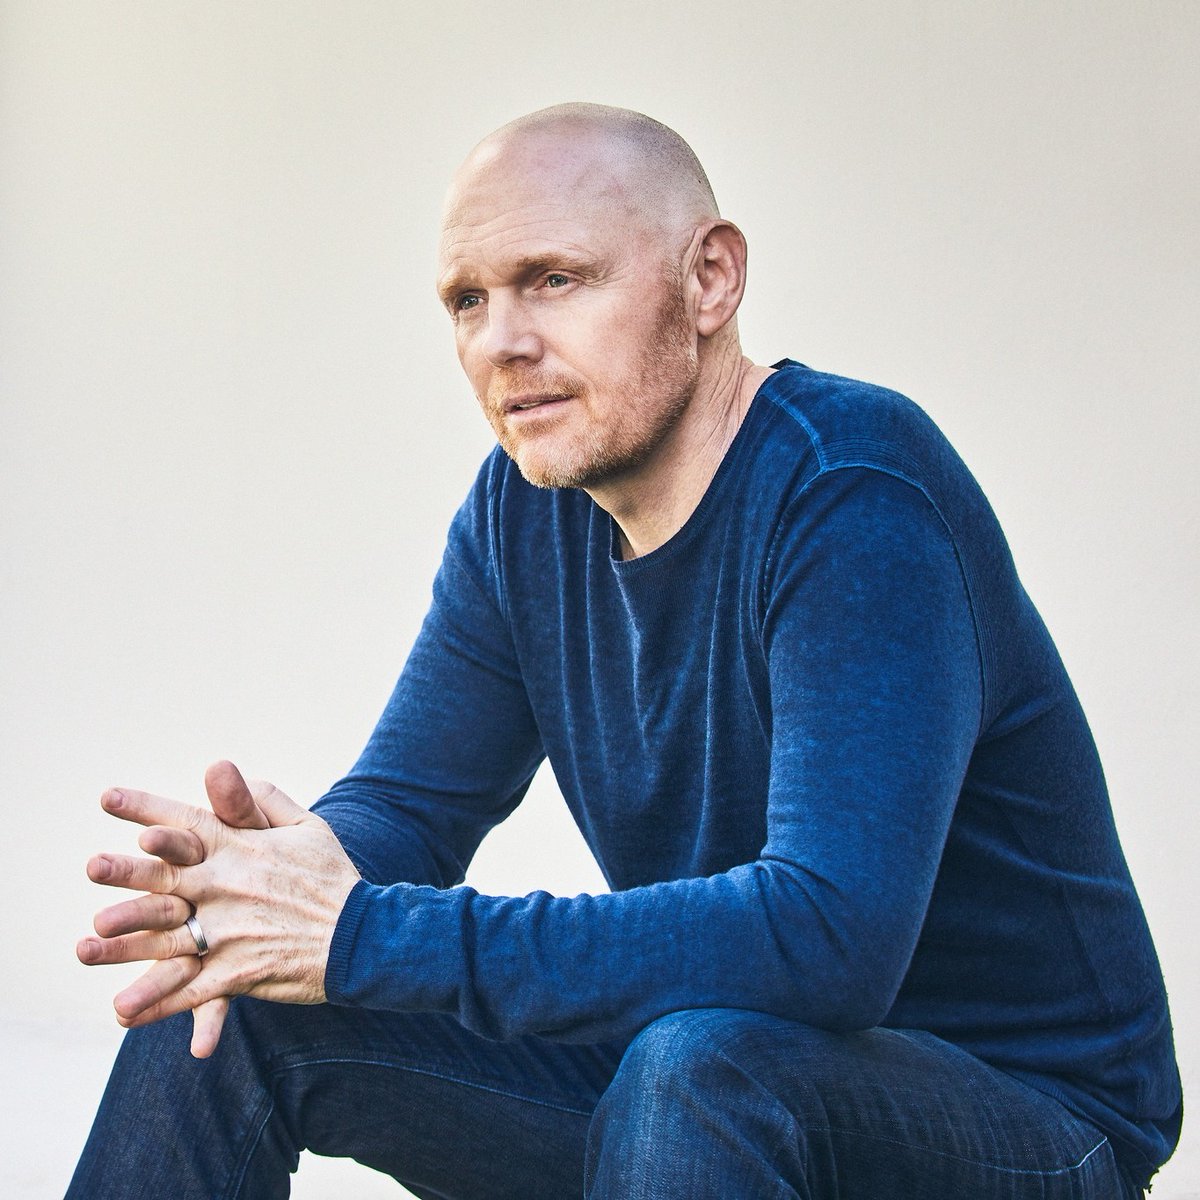 🎤 Bill Burr will be coming back to Bridgestone Arena on Friday, May 17! 🎟️ See his return to #SMASHVILLE > bit.ly/41bpNJP